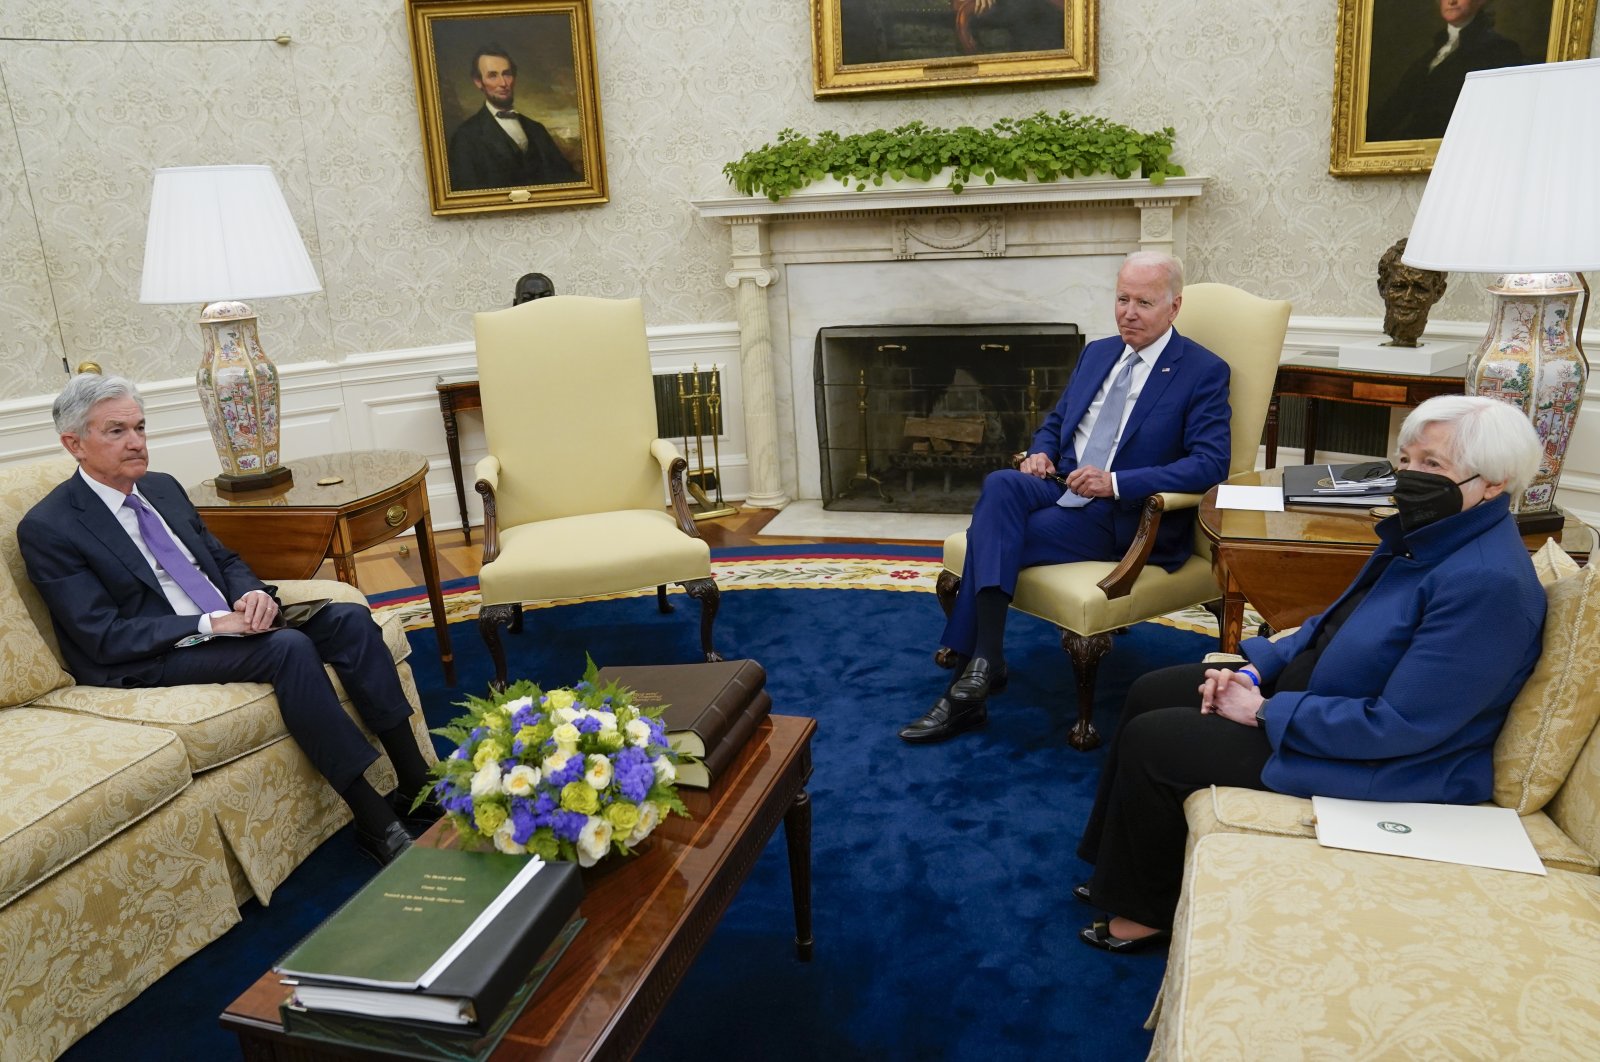 President Joe Biden meets with Treasury Secretary Janet Yellen (R) and Federal Reserve Chairperson Jerome Powell in the Oval Office, the White House, Washington, U.S., May 31, 2022. (AP Photo)